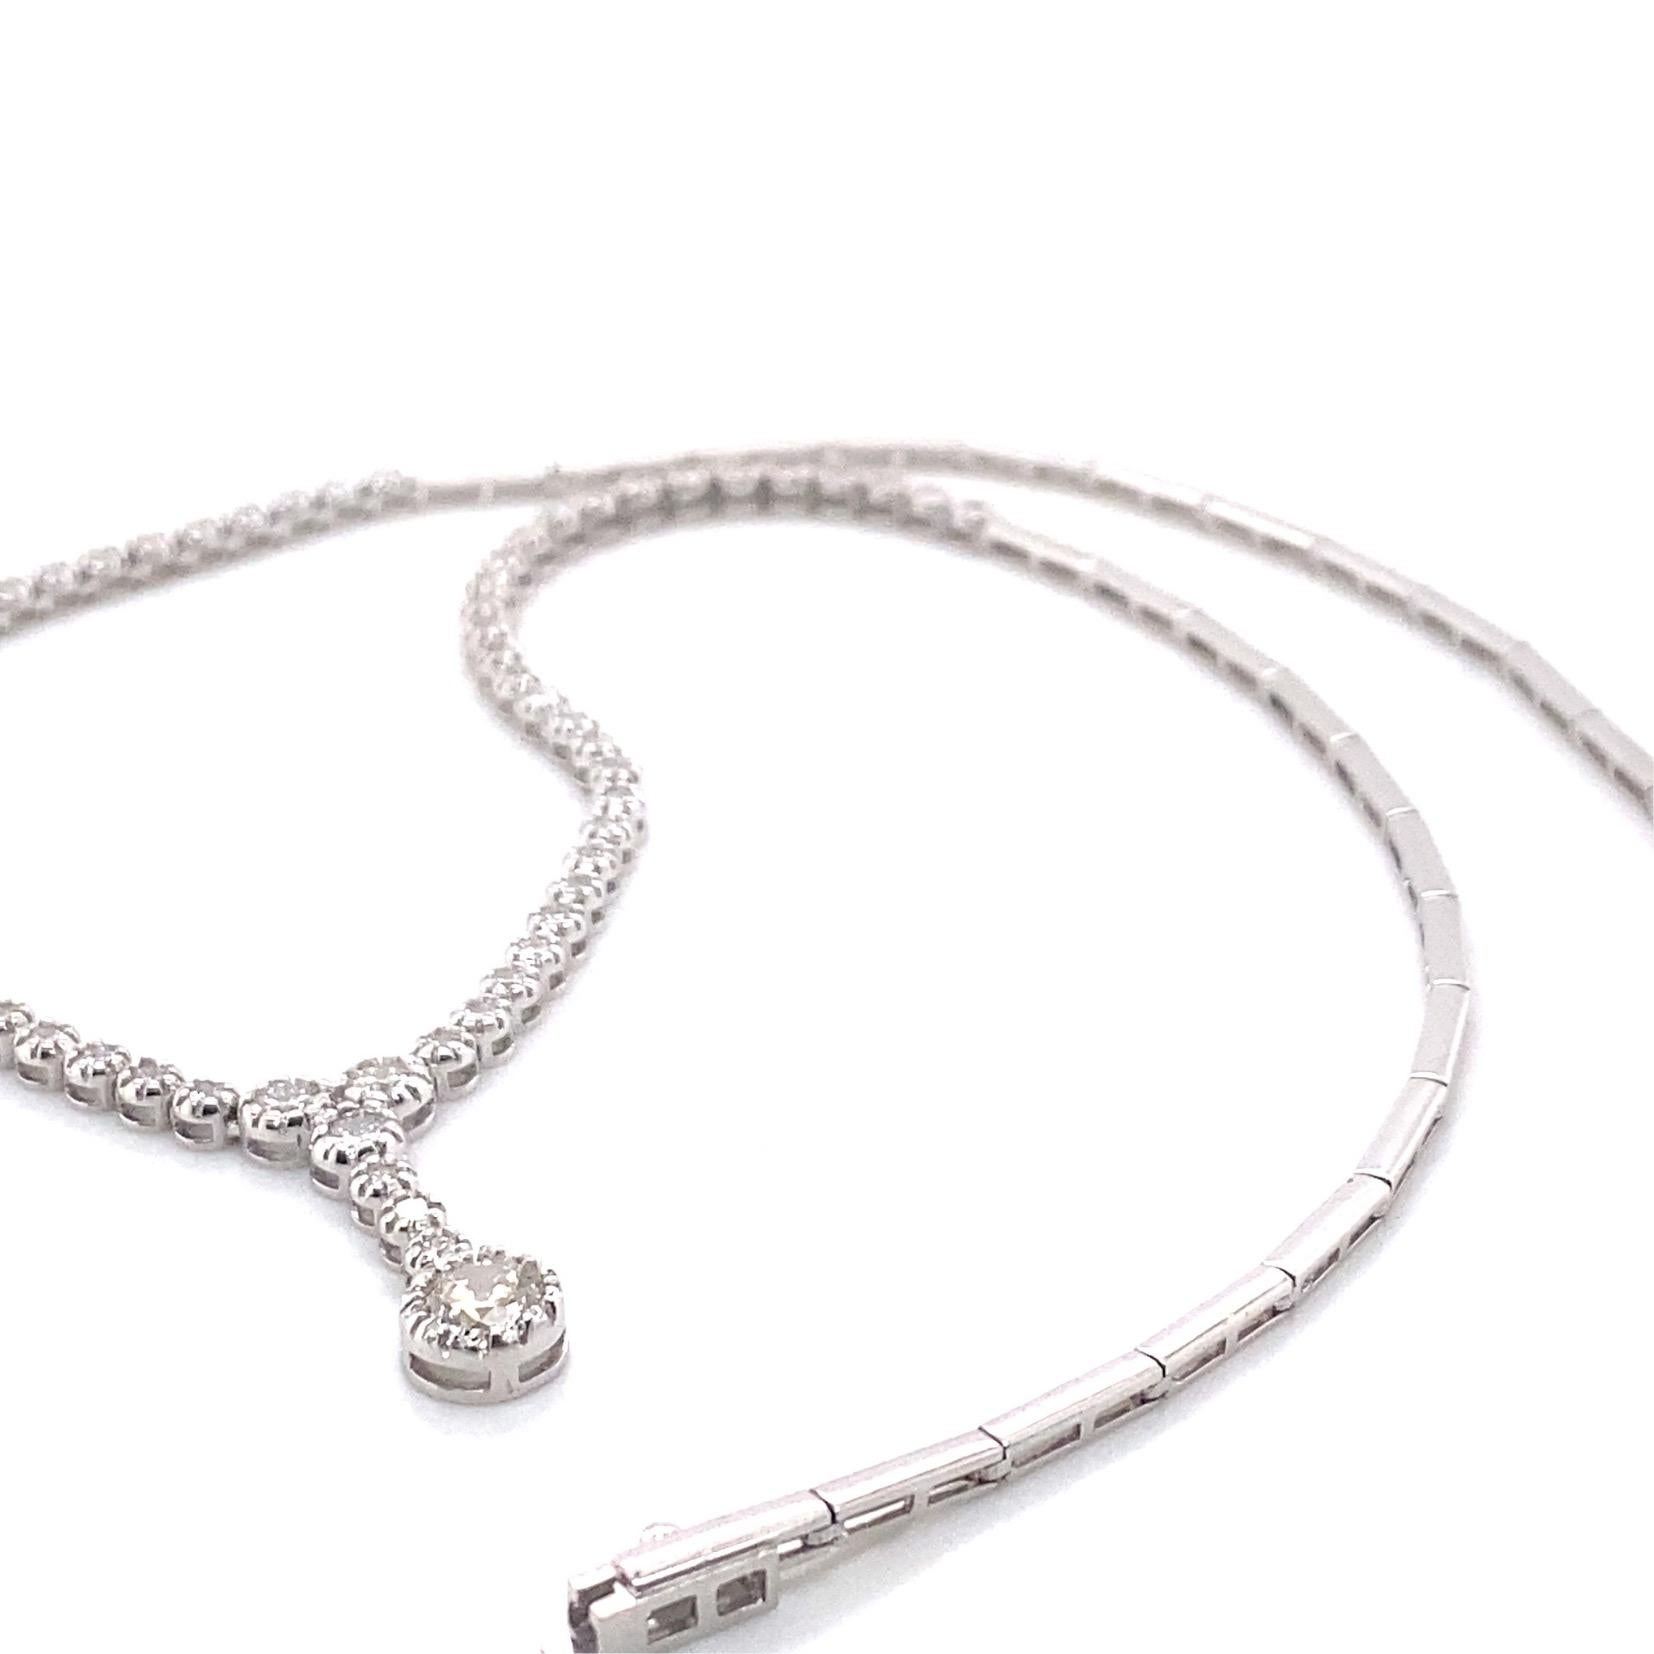 An elegant statement piece. The necklace contains 2.88 carats of white diamonds rated F/G VVS set into 18-karat white gold. It has been hand-made using traditional methods and was designed and produced in Palermo, Sicily by master jewellers. 

The